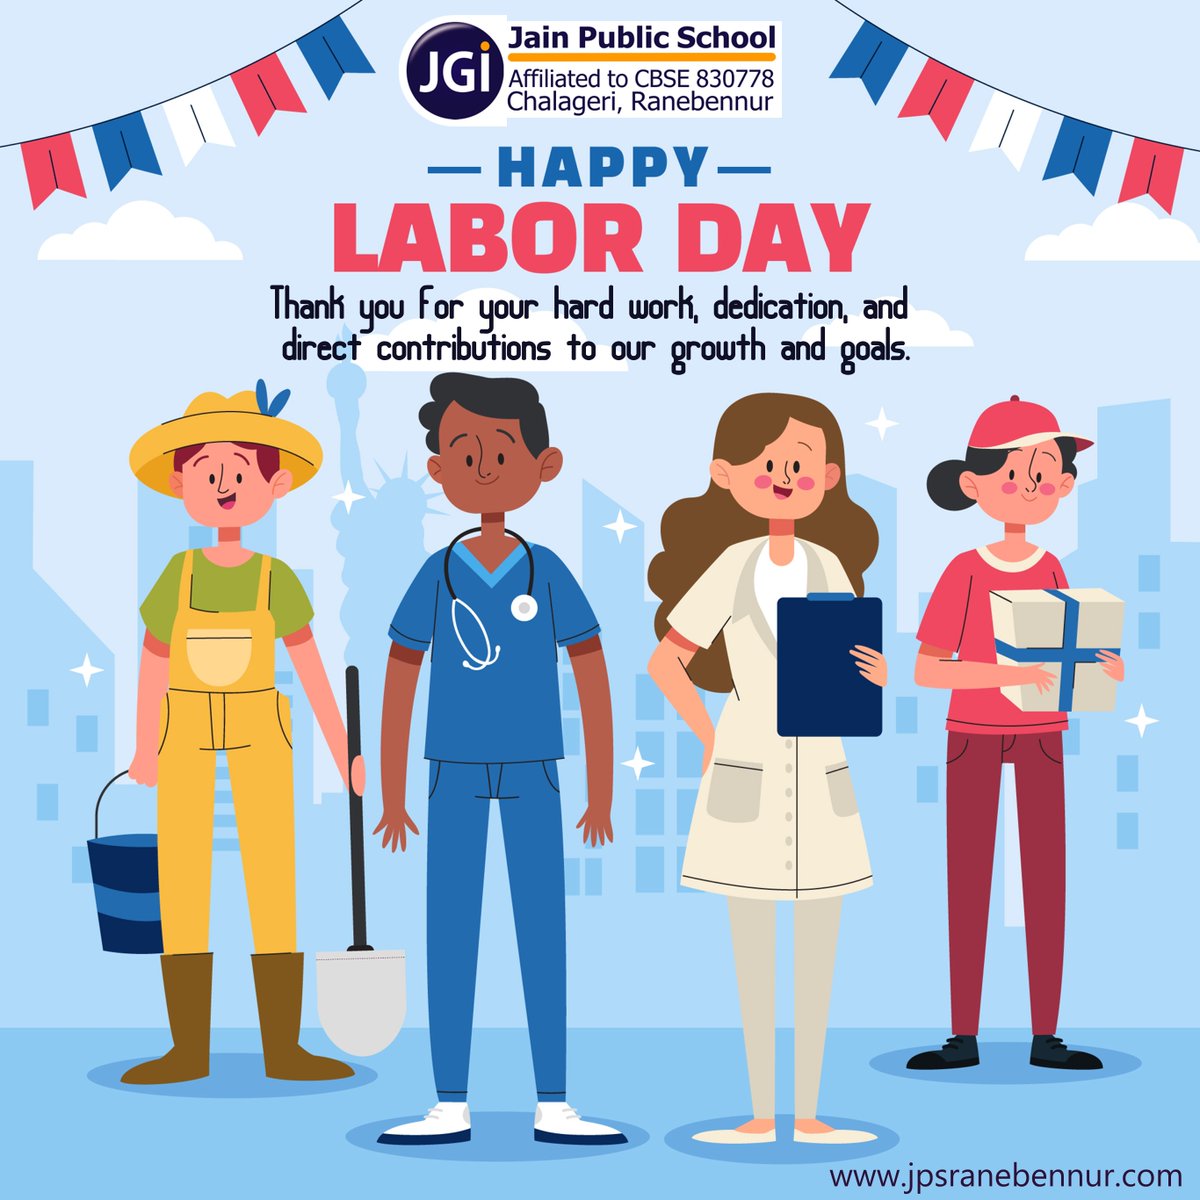 Jain Public School, Ranebennur
Wishing you all a very Happy Labor Day!
'Thank you for your hard work, dedication, and 
direct contributions to our growth and goals.'
jpsranebennur.com
#HappyLaborDay #jainpublicschoolranebennur #jpsranebennur
freepik.com